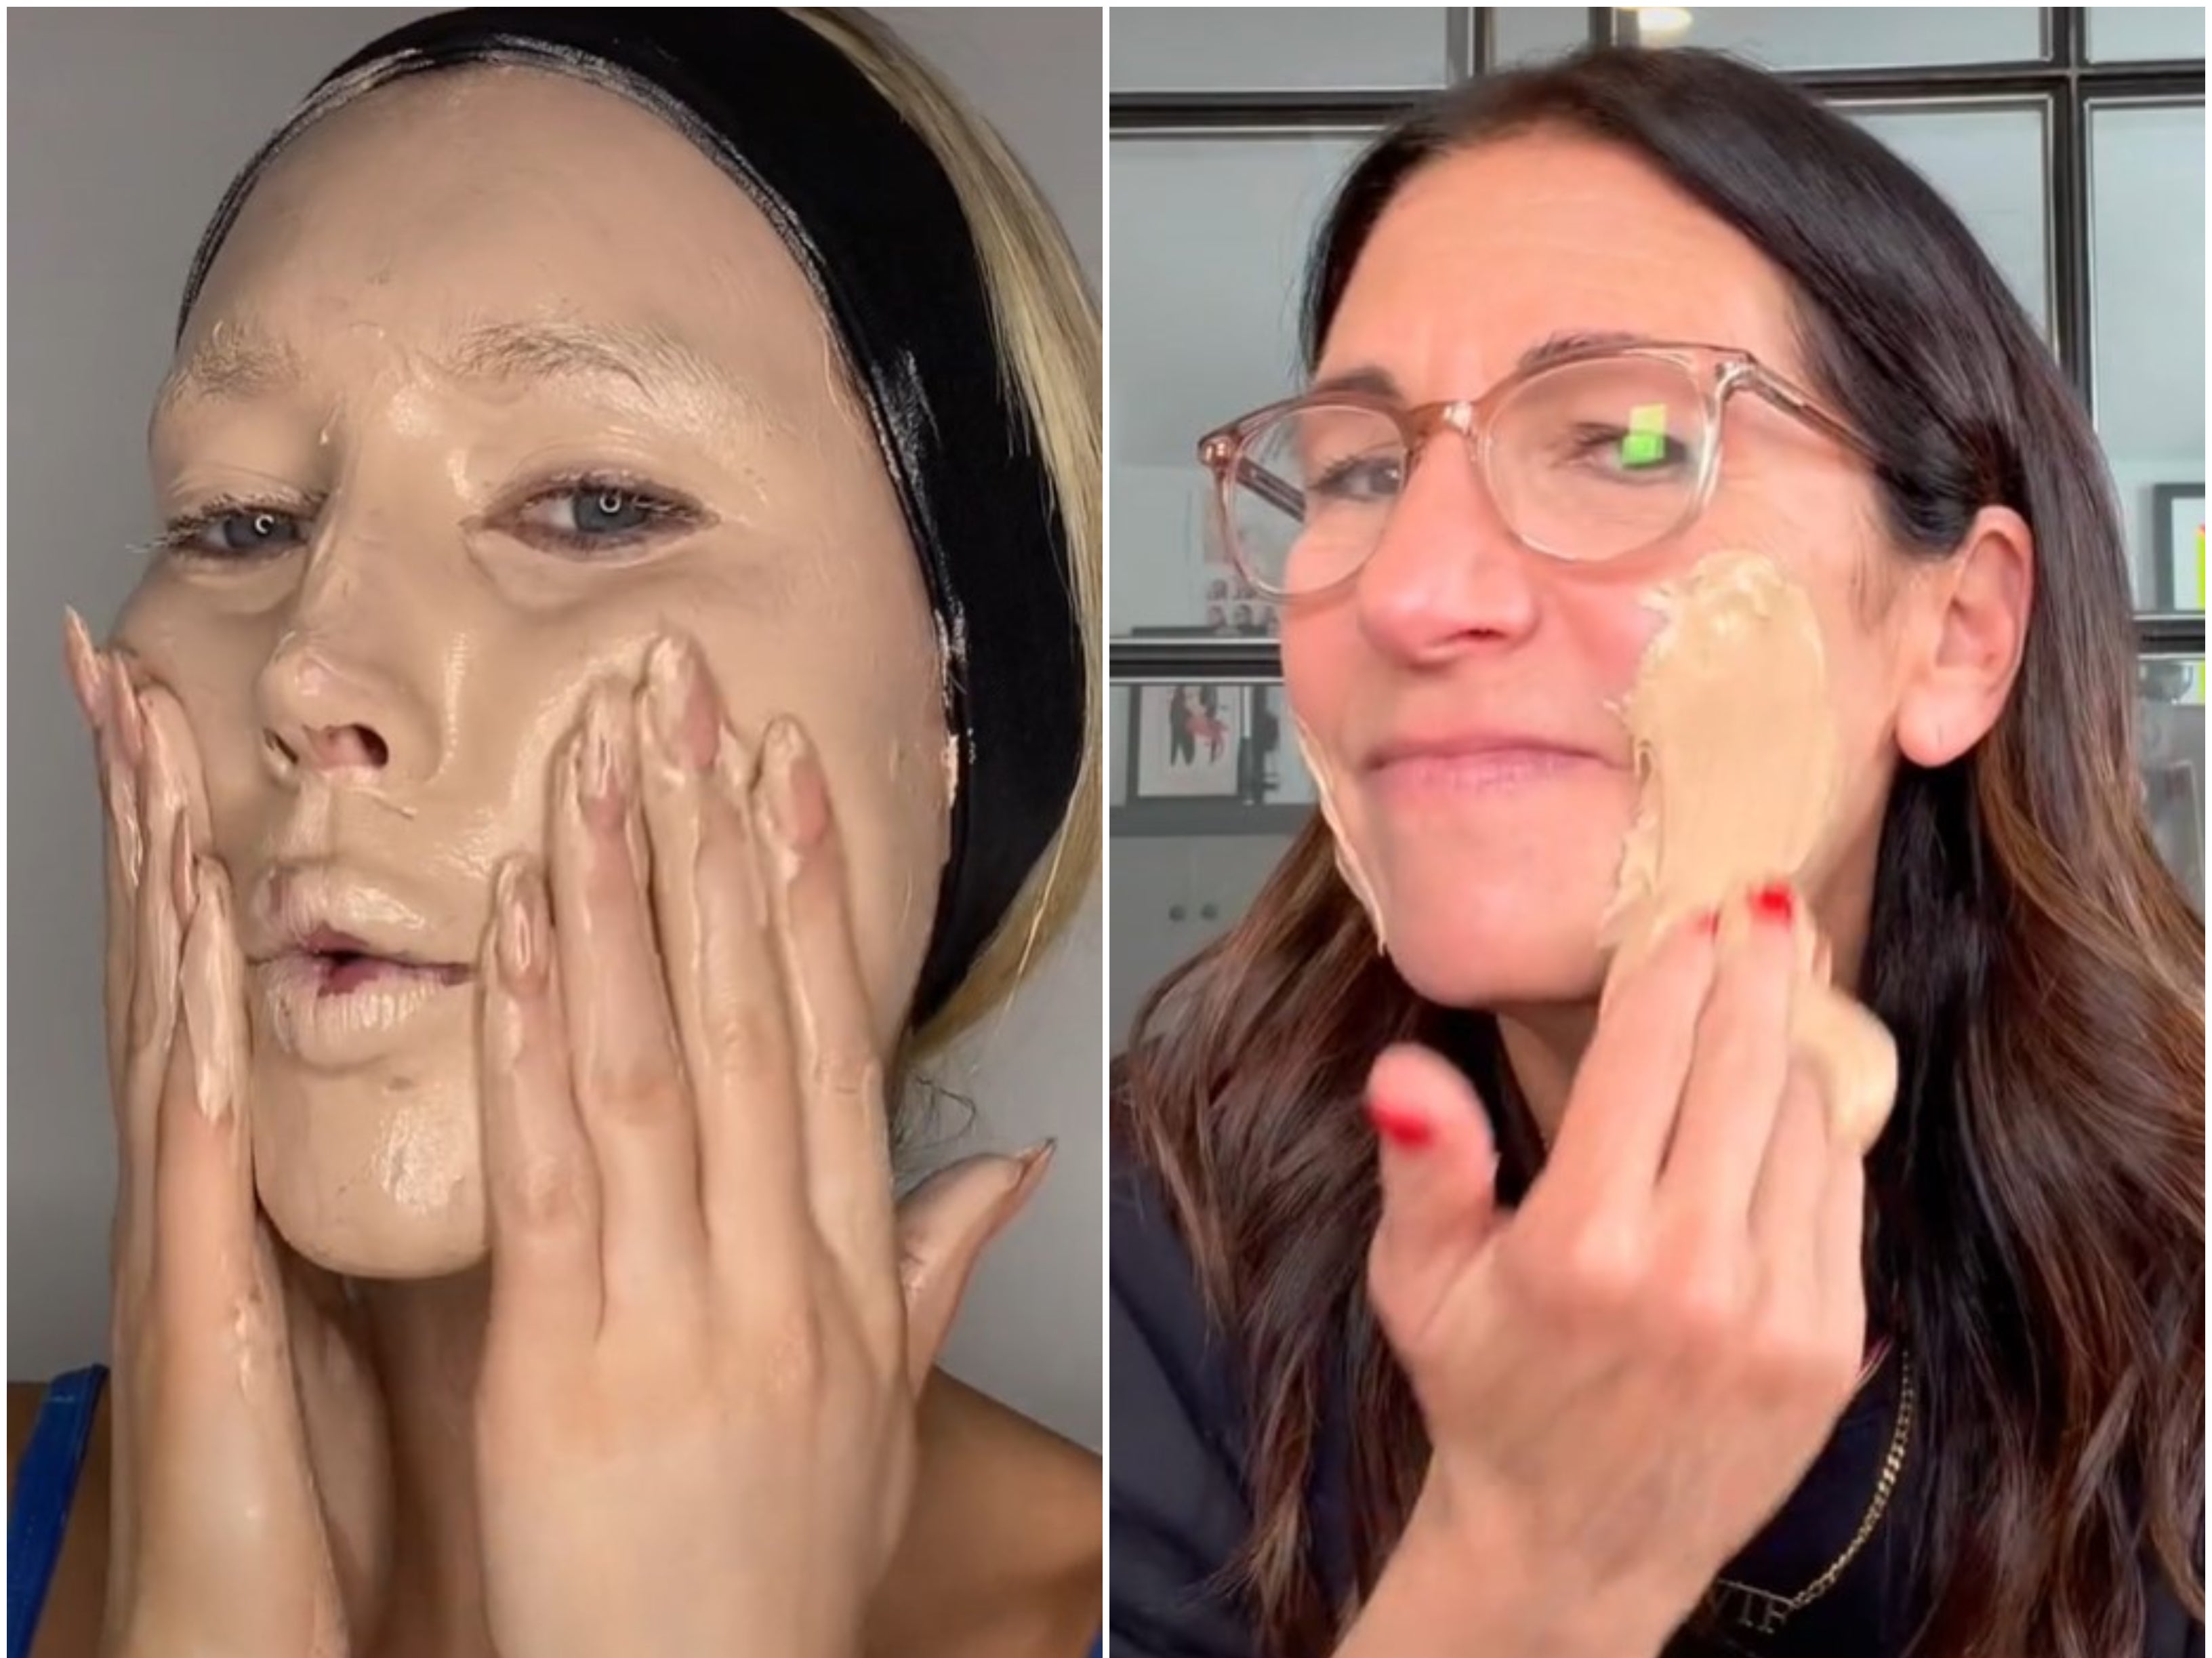 Meredith used an unconventional technique to apply the product